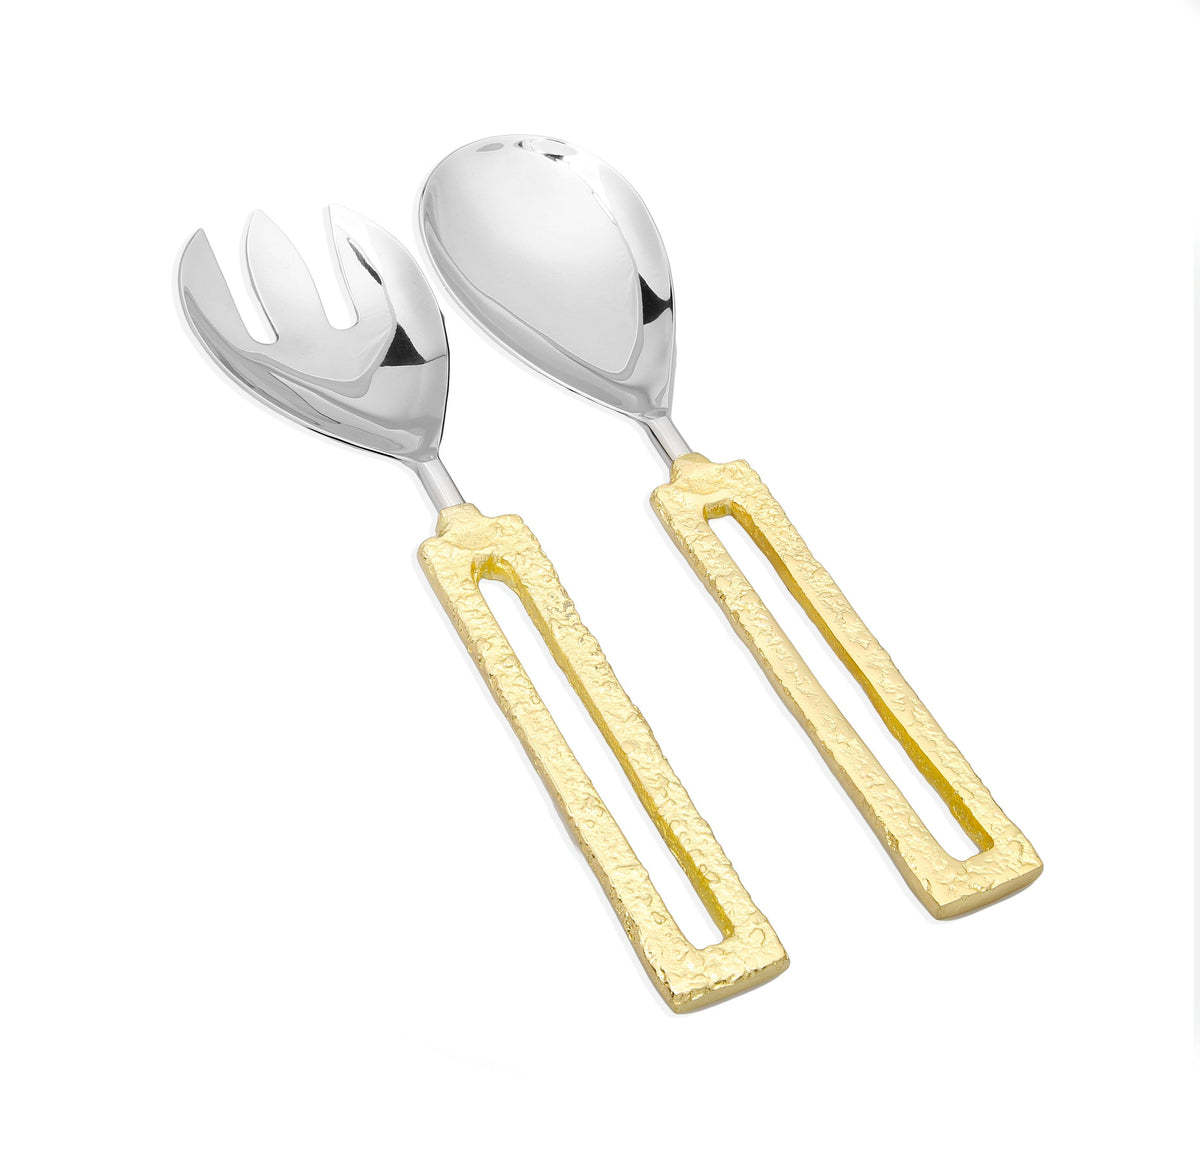 Classic Touch Salad Servers with Square Gold Loop Handles Spoon and Fork